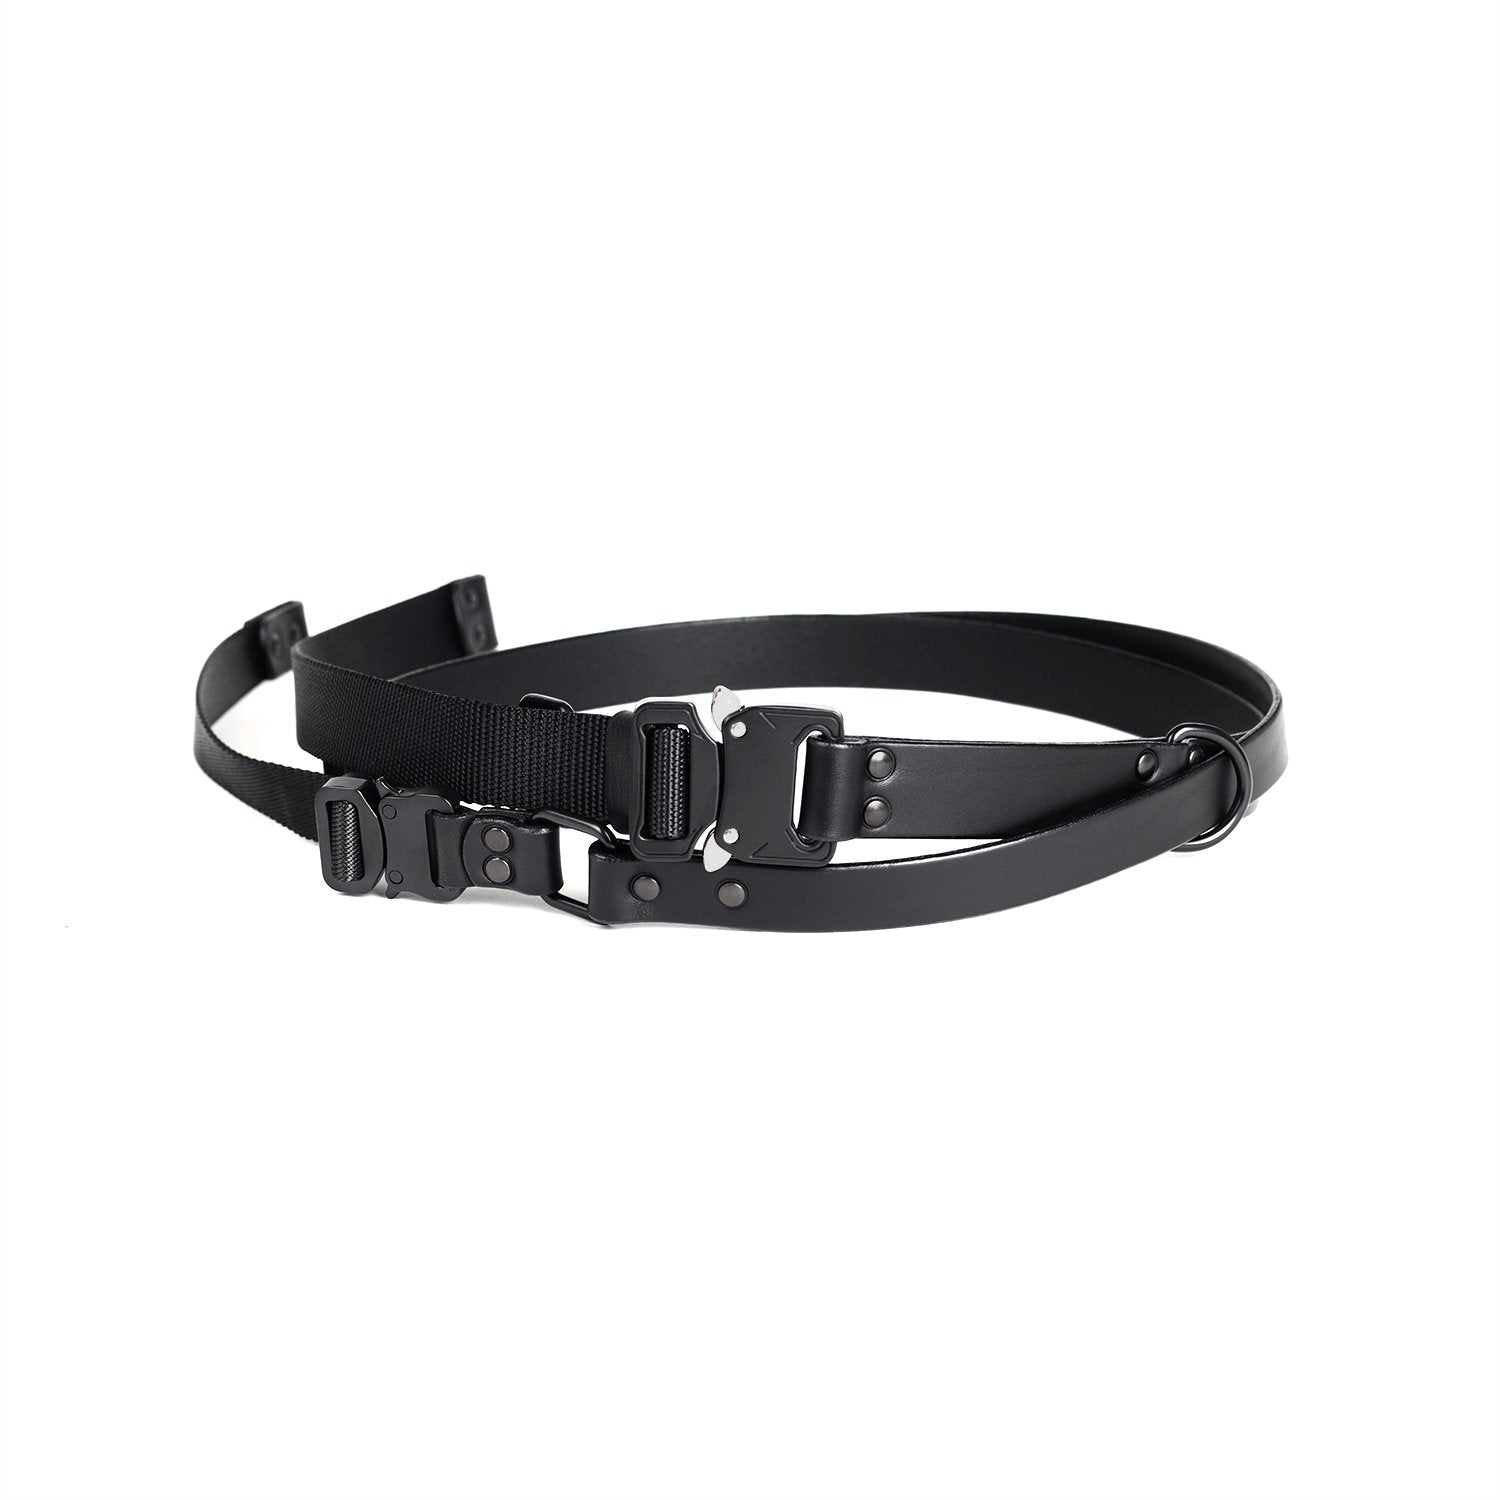 A3TEPHRA 1123BLACKAccessorize with our unique and versatile double-belt design! Our handmade belt, crafted with the finest vegetable-tanned cow leather and durable nylon webbing, featAccessori UnisexTEOTEPHRAA3TEPHRA 1123BLACK